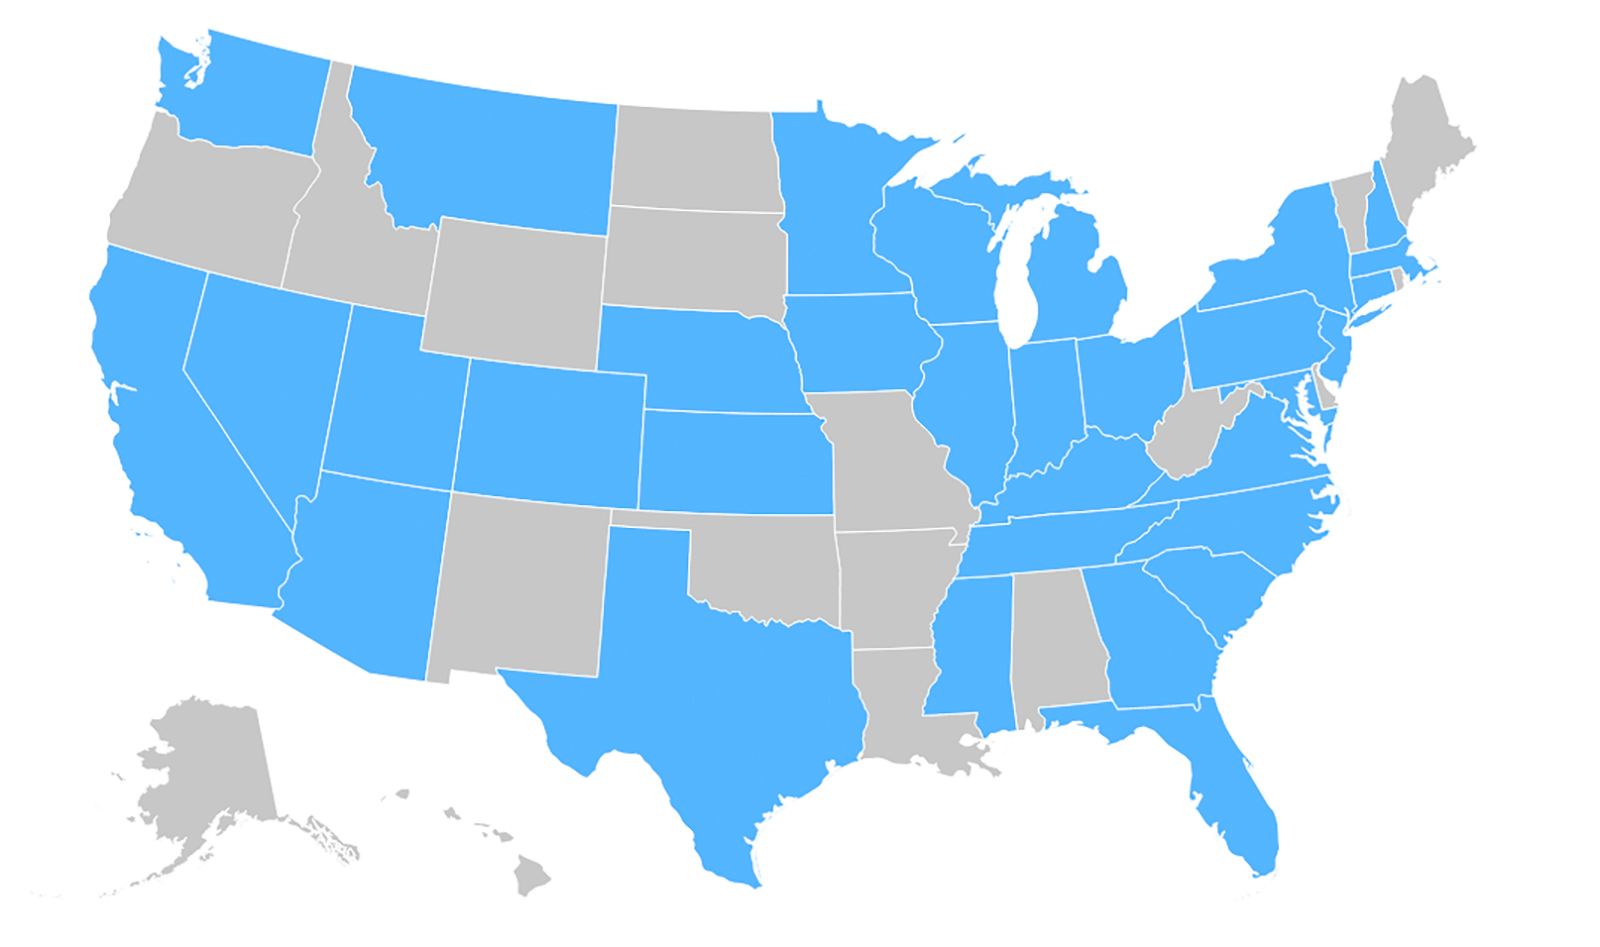 A map of the united states with the outline of states drawn with white lines. Thirty states are shaded in blue to represent where the America's Promise Alliance has awarded over 100 Power of Youth challenge grants.